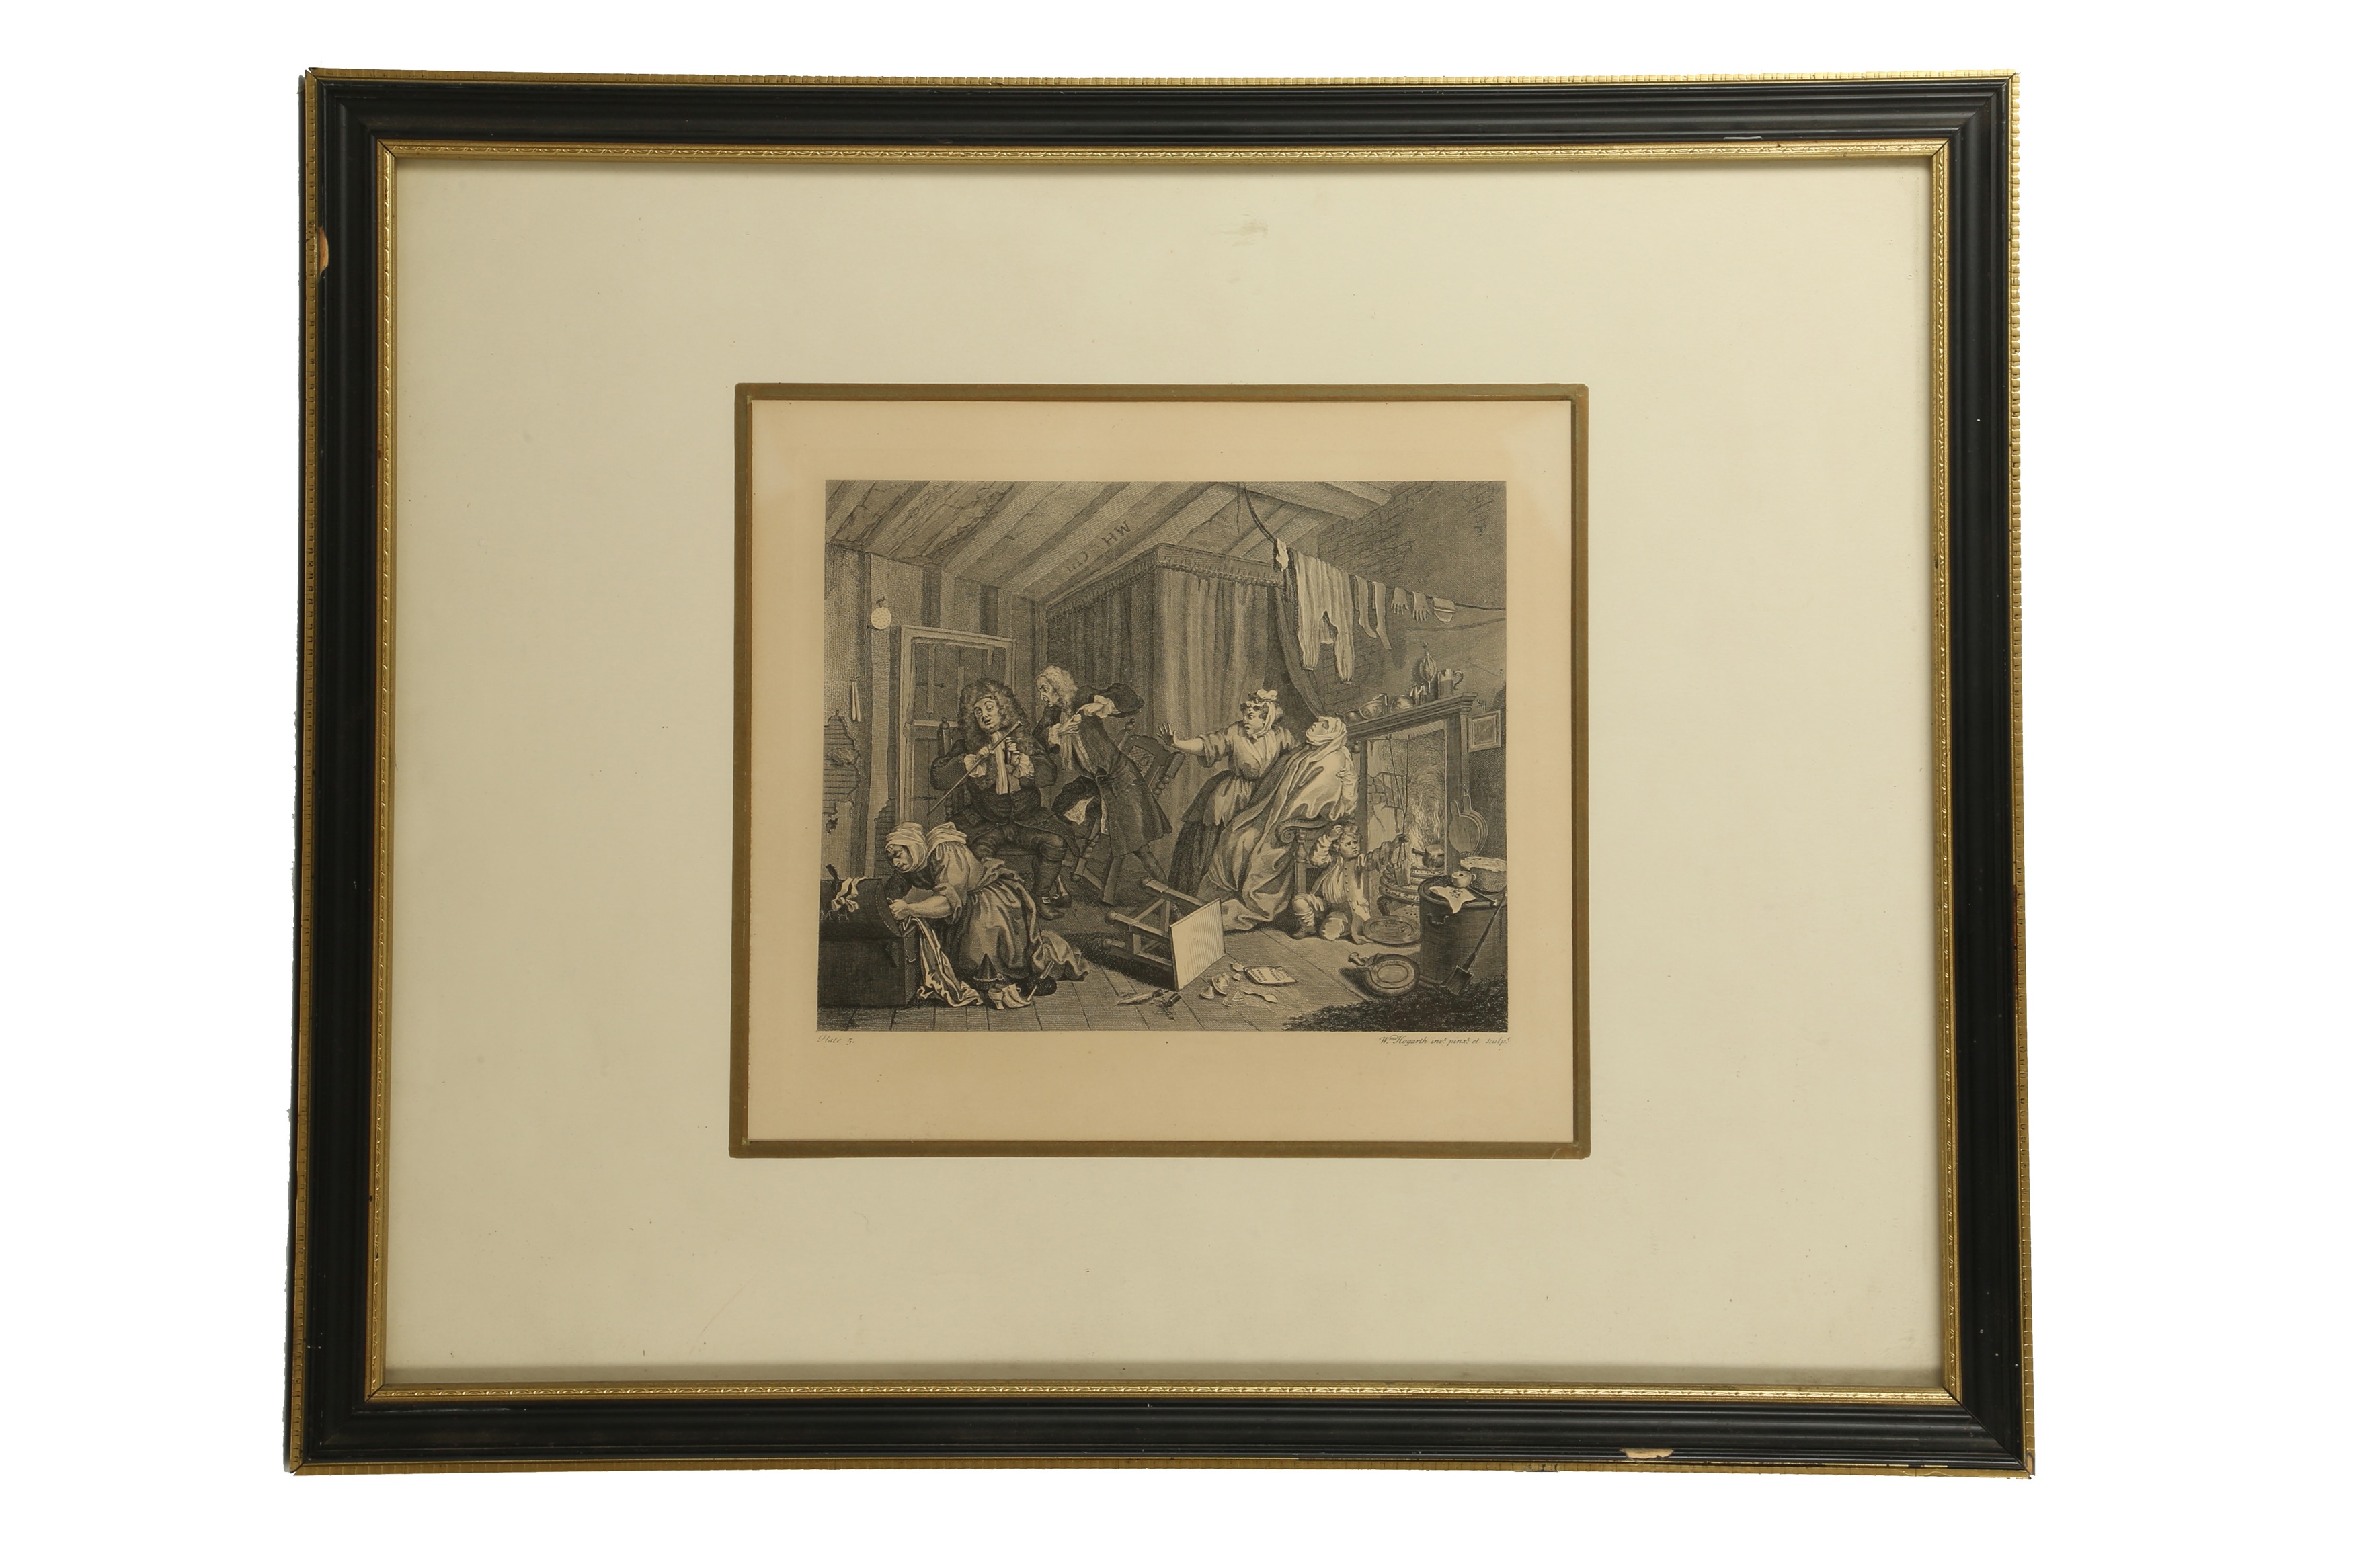 Lot 50 - SIX 19TH CENTURY PRINTS AFTER HOGARTH, 'THE